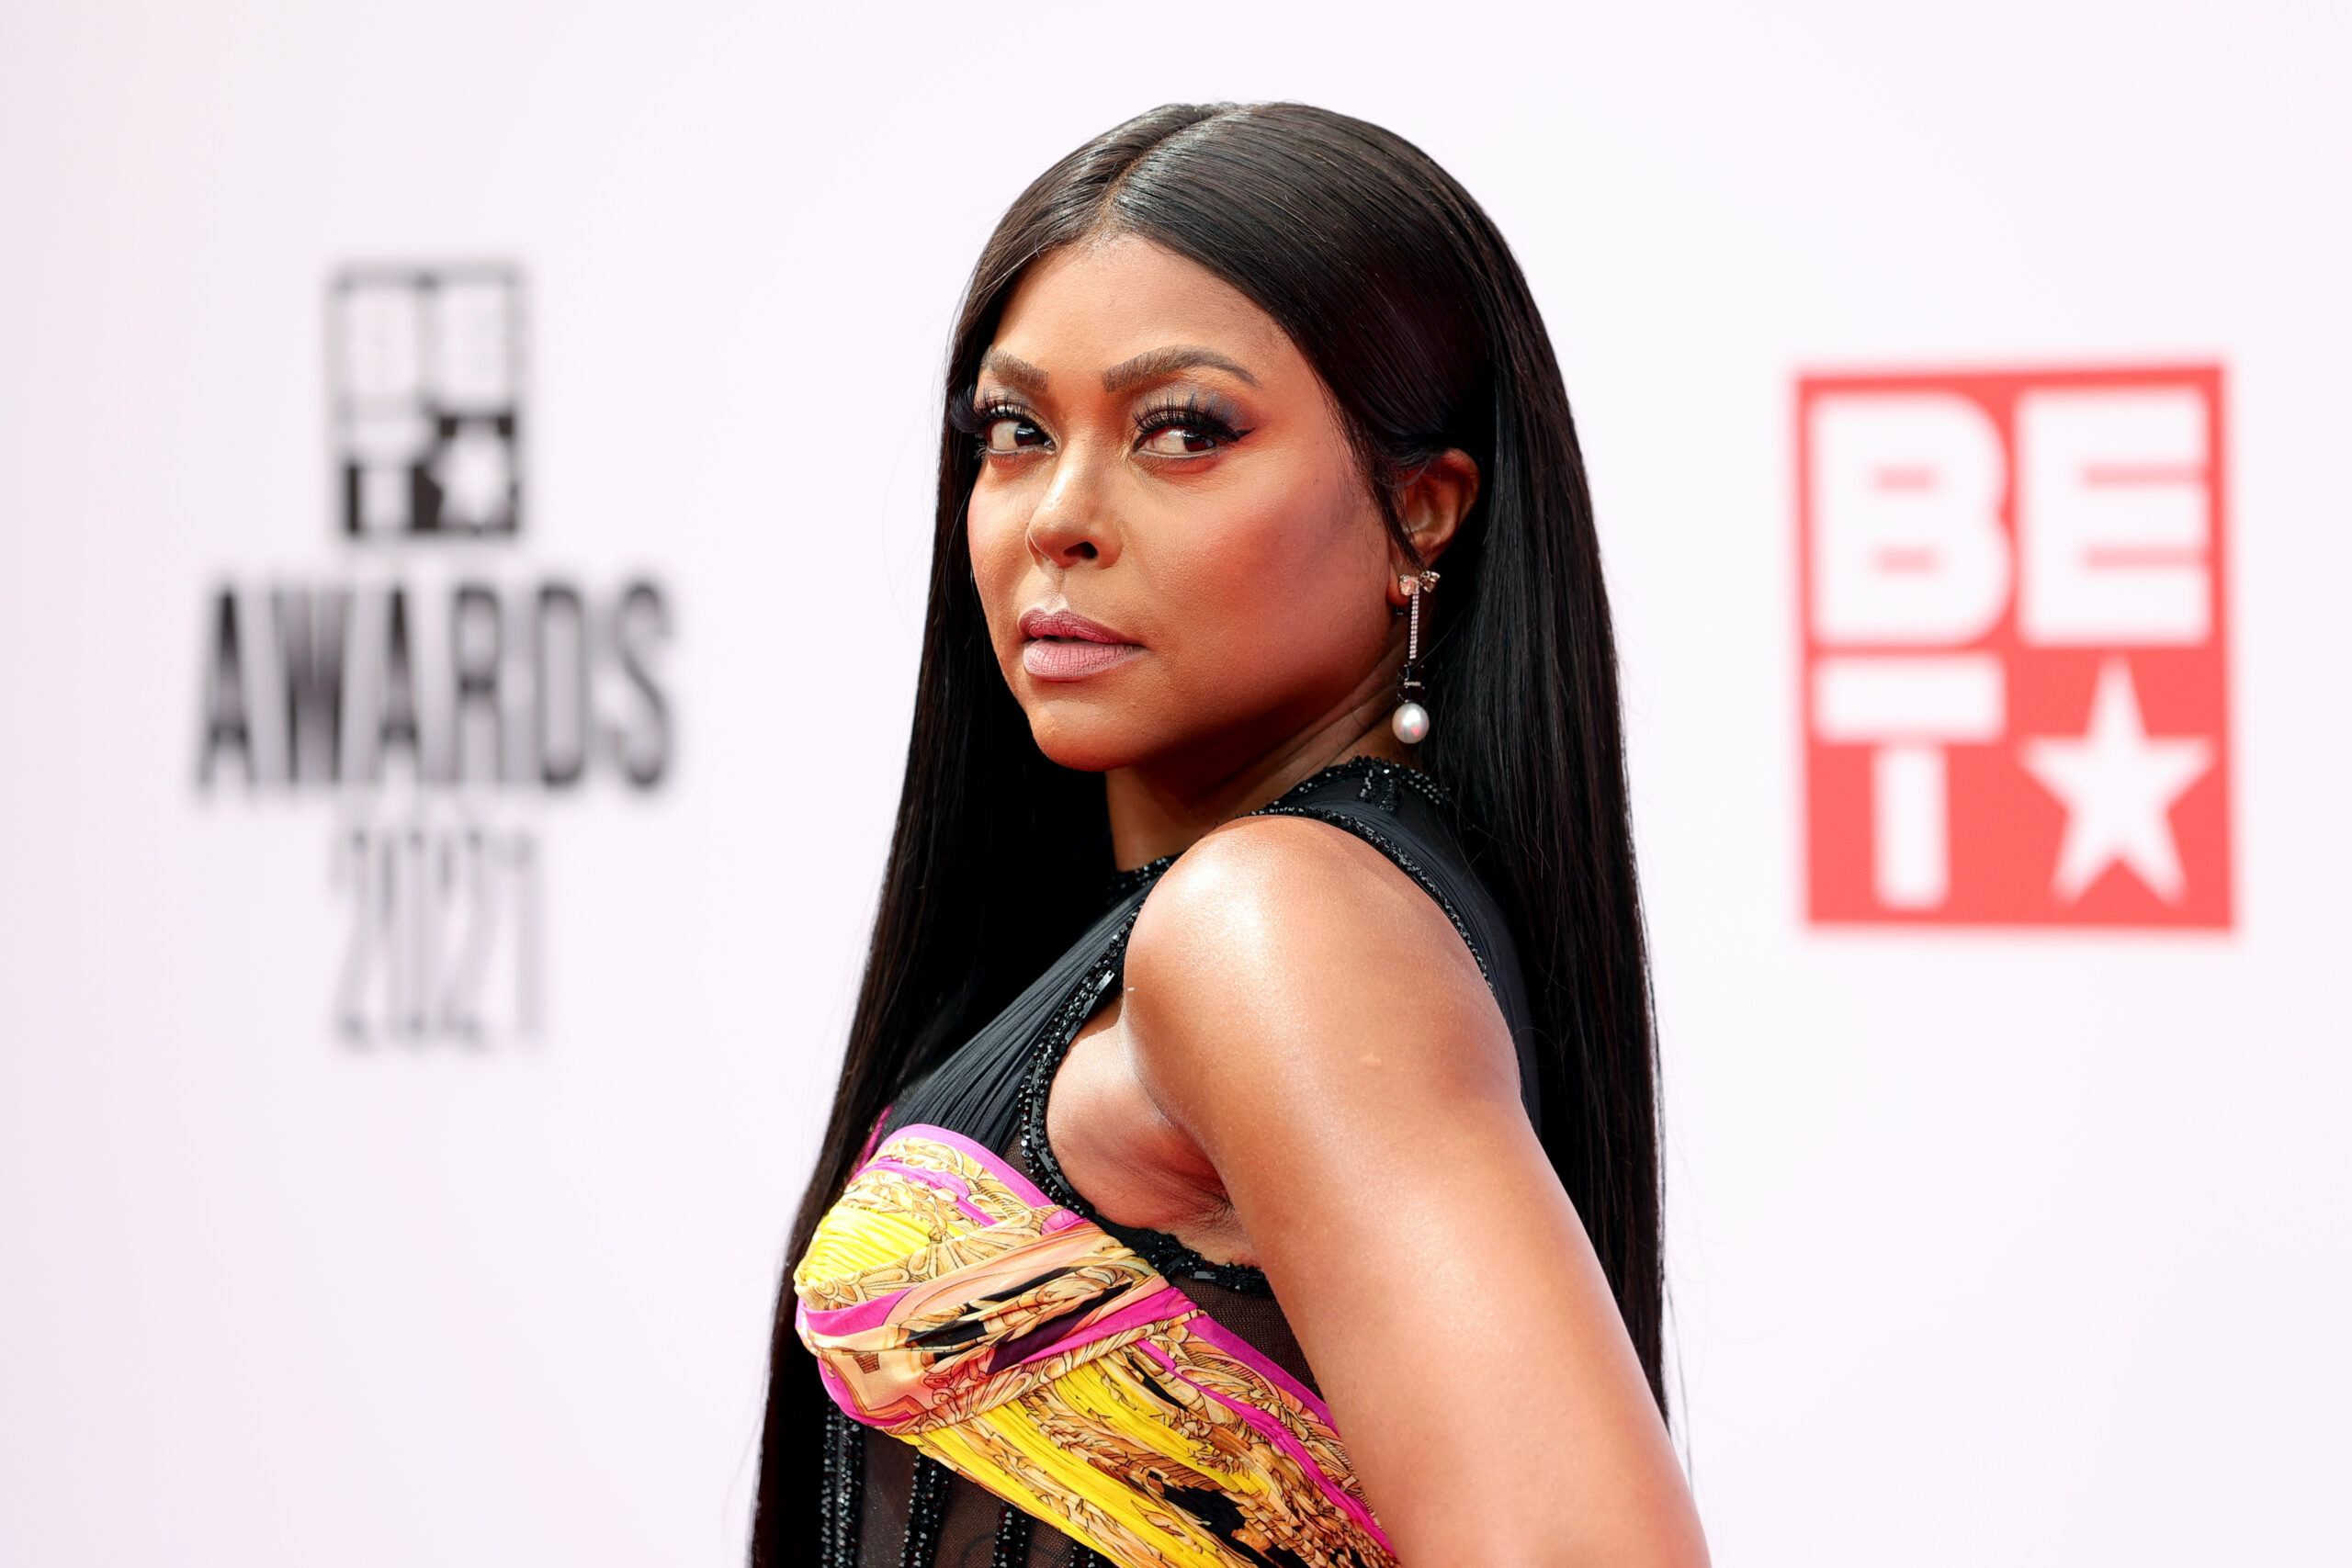 Taraji P. Henson Says She's Thinking About Moving Abroad for a More Welcoming Racial Climate